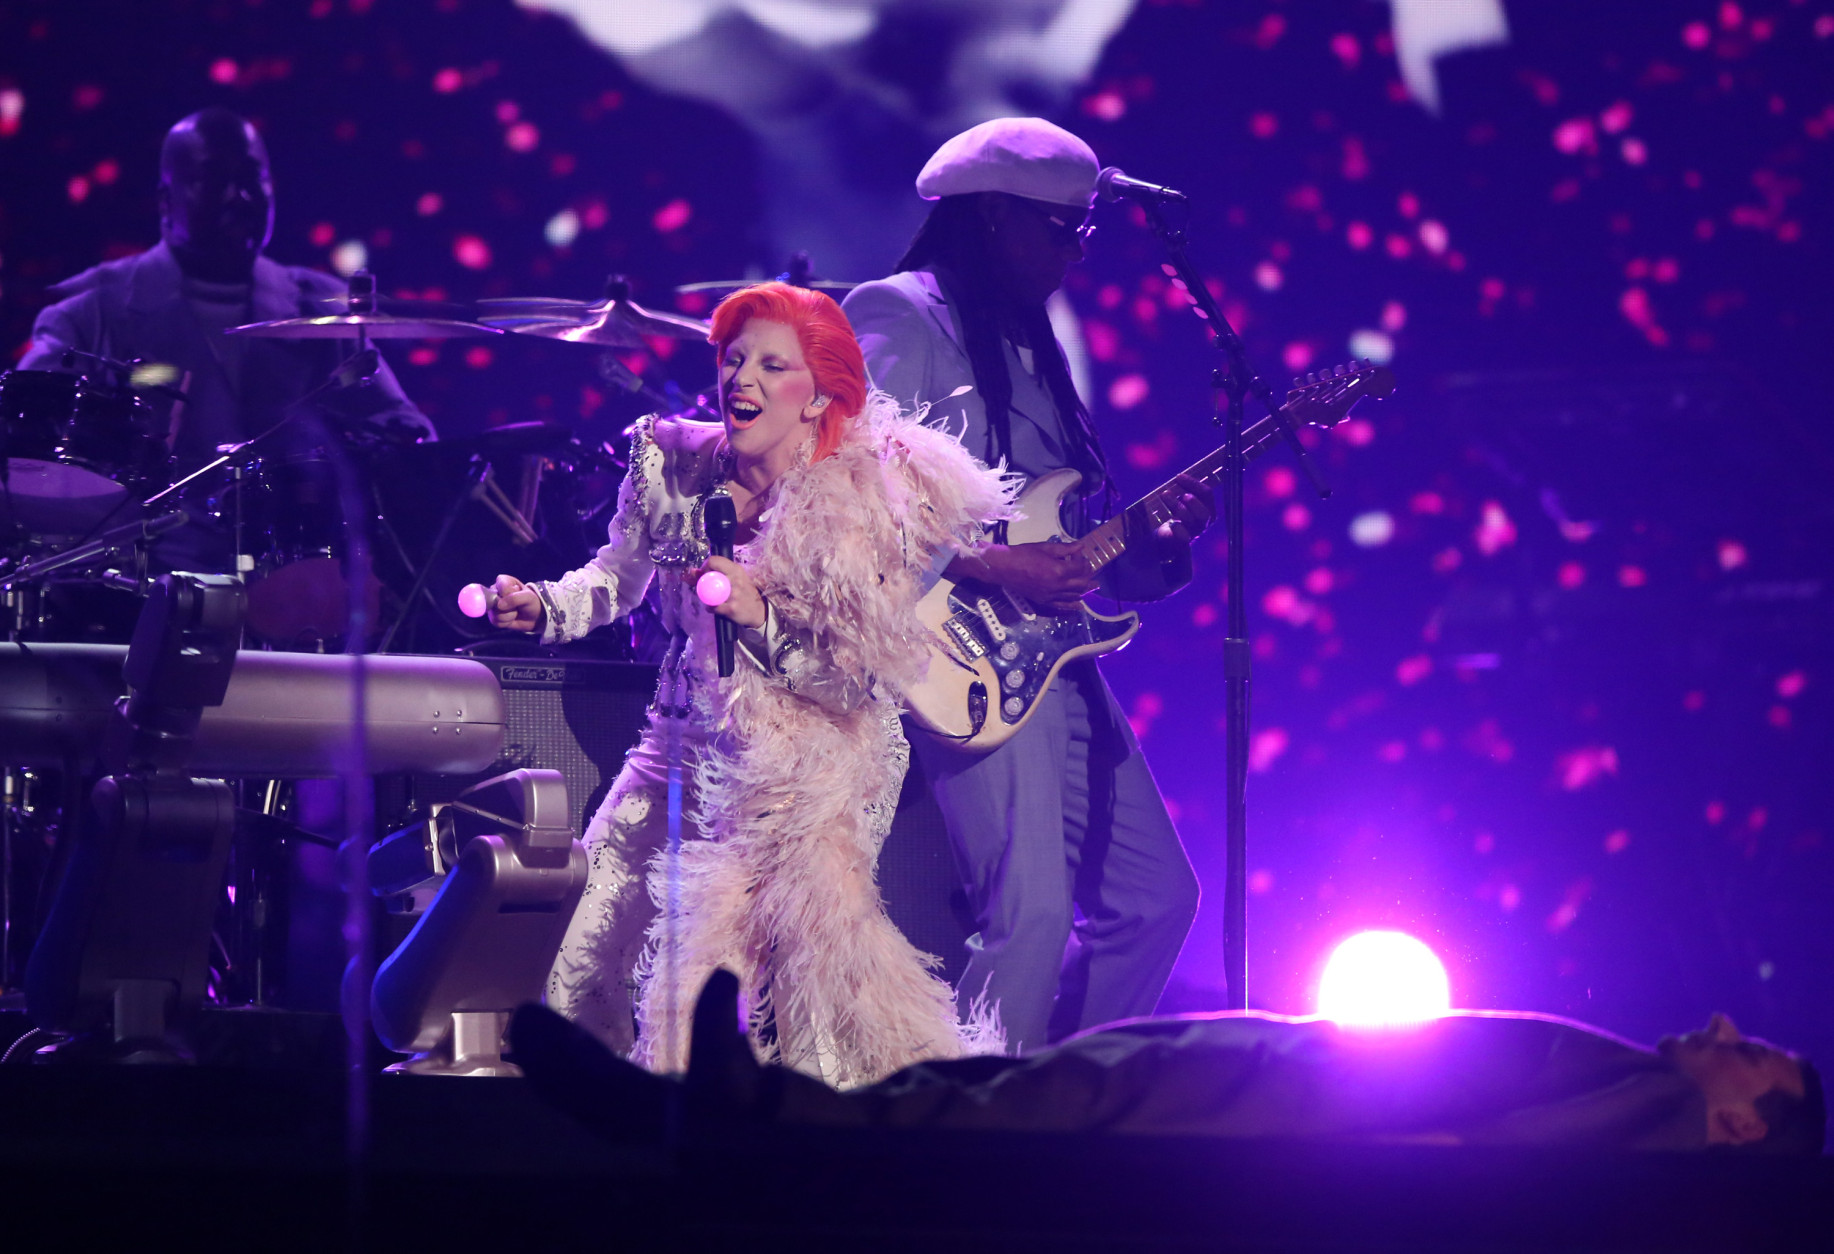 Lady Gaga performs a tribute to David Bowie at the 58th annual Grammy Awards on Monday, Feb. 15, 2016, in Los Angeles. (Photo by Matt Sayles/Invision/AP)